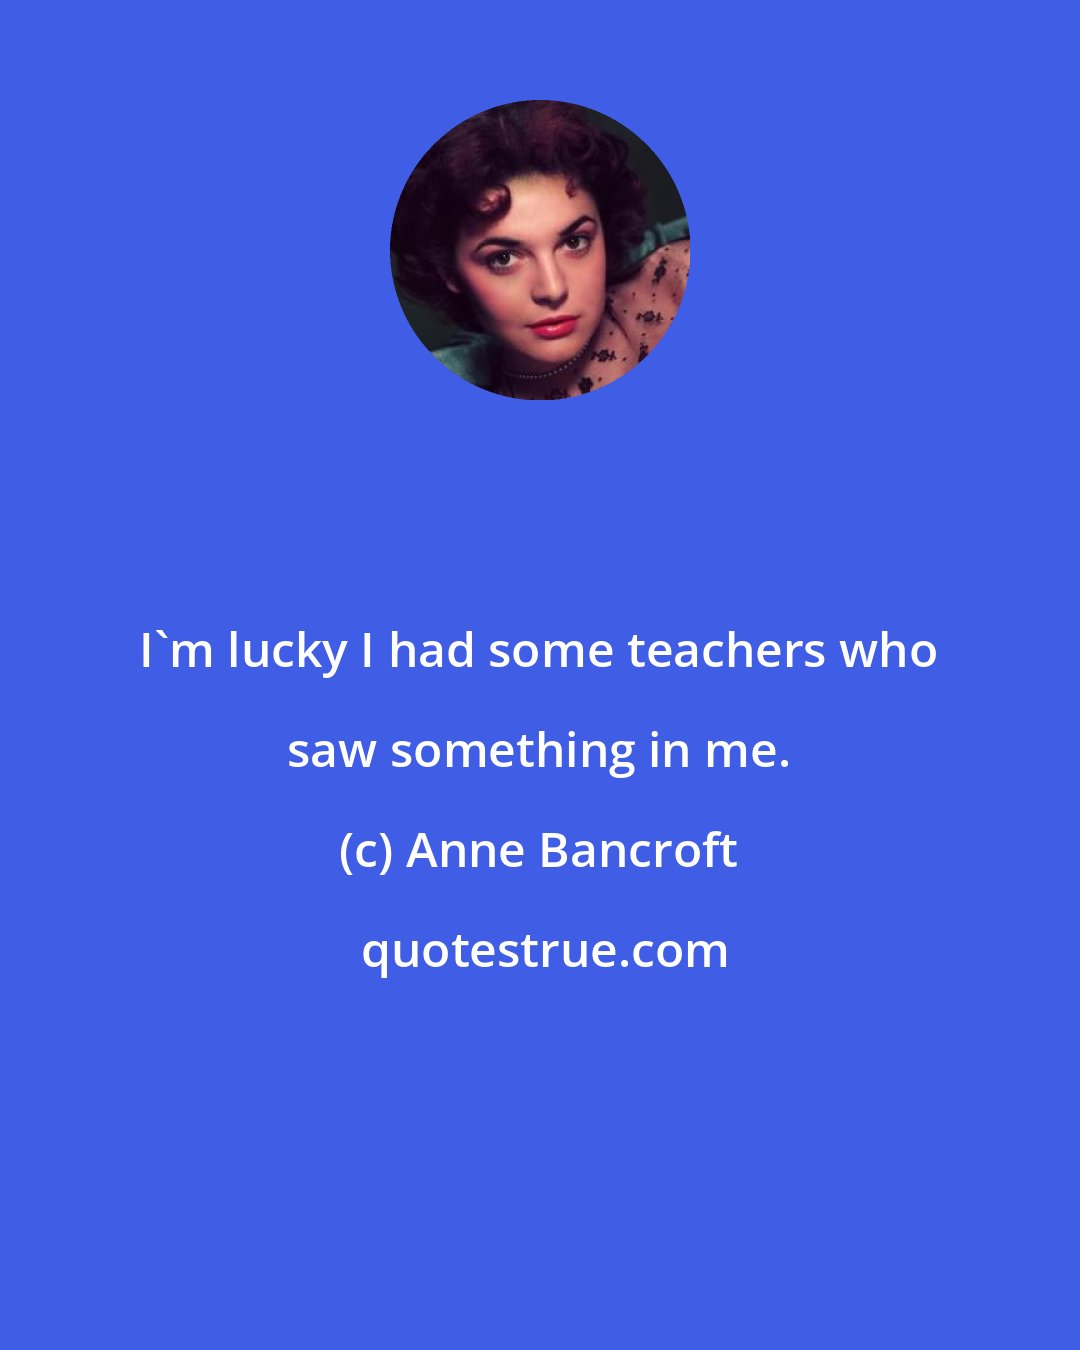 Anne Bancroft: I'm lucky I had some teachers who saw something in me.